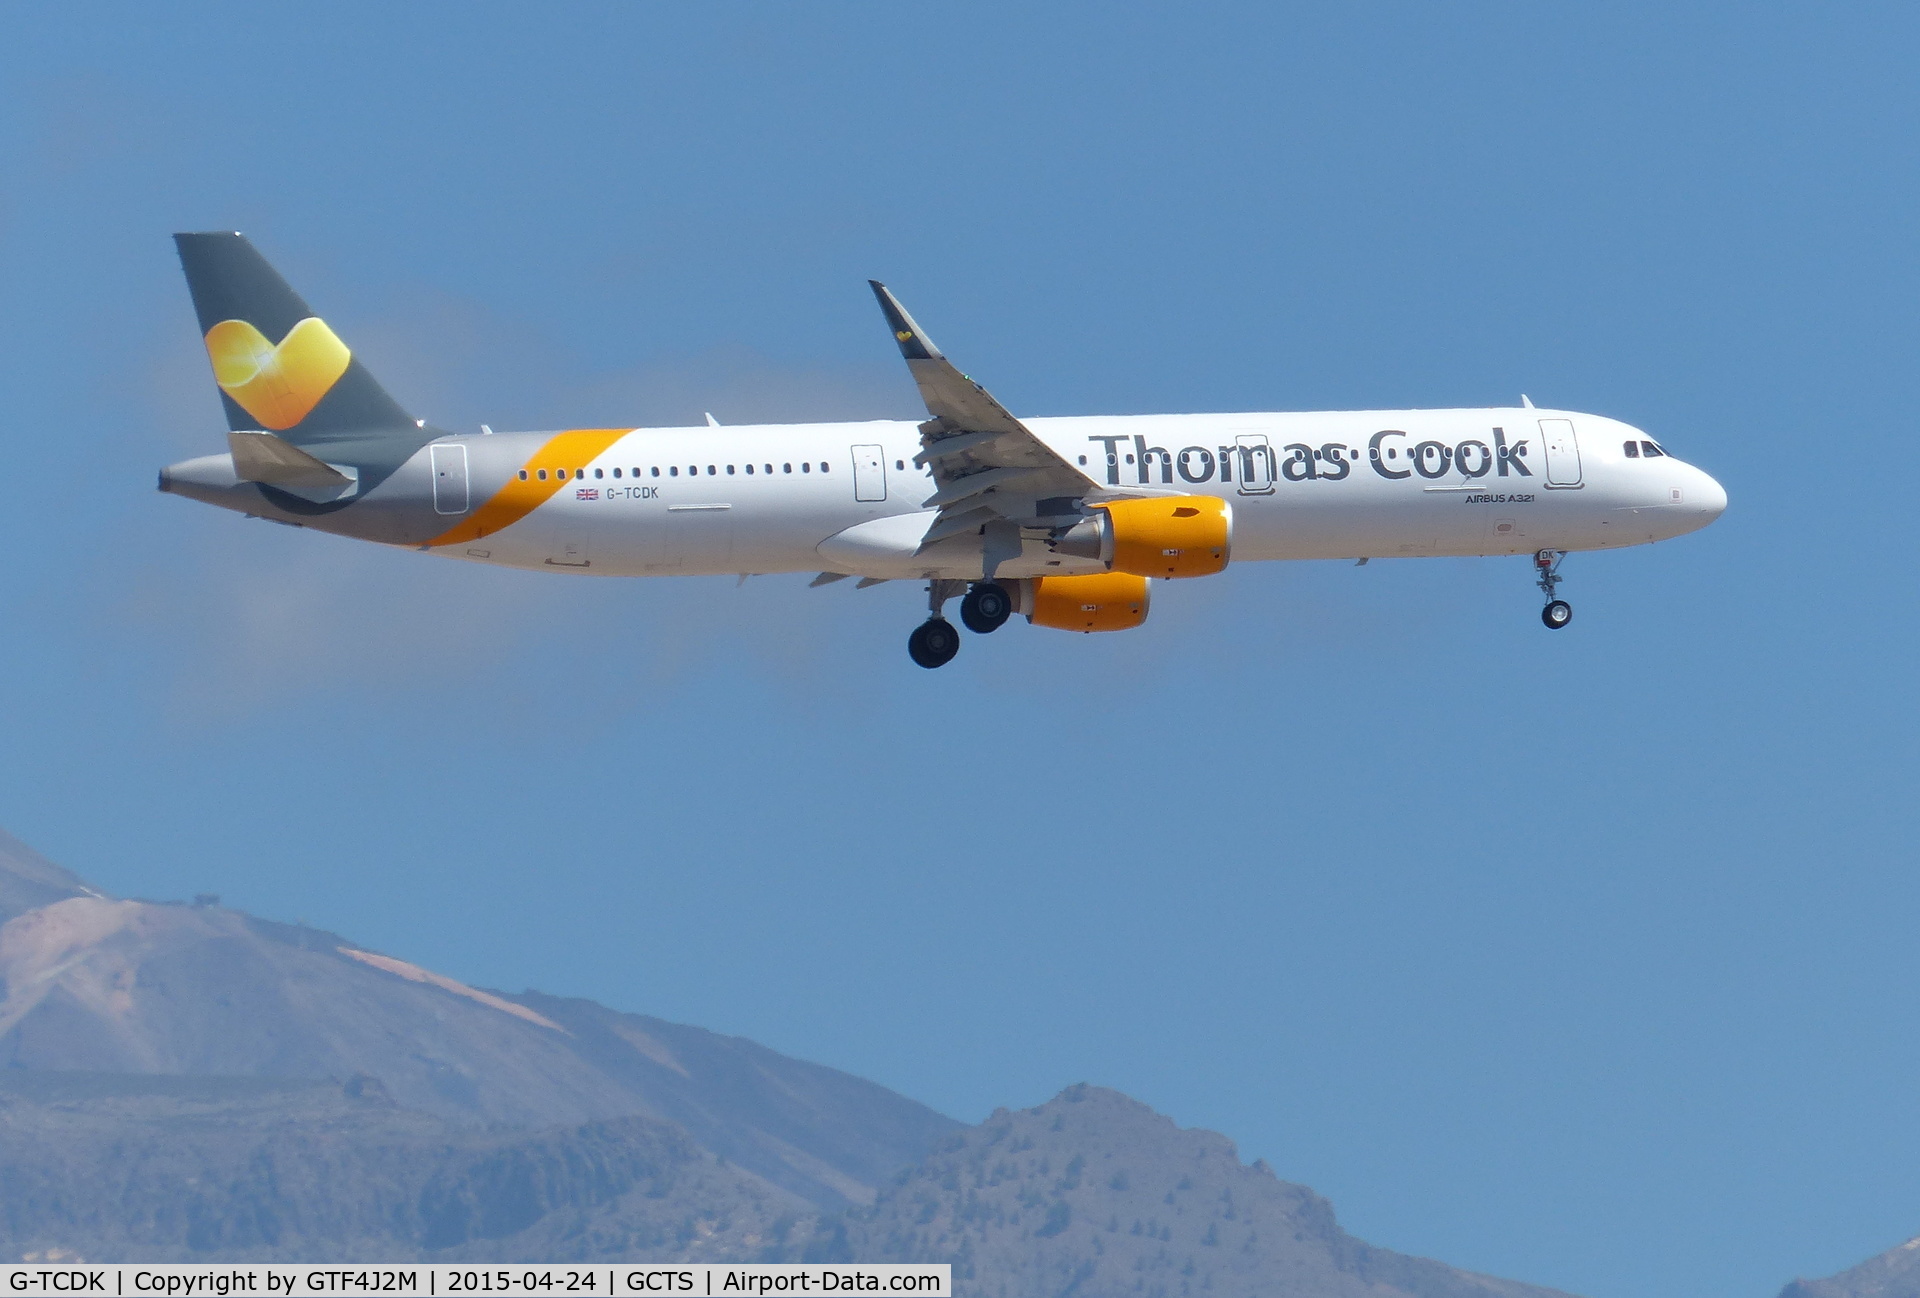 G-TCDK, 2015 Airbus A321-211 C/N 6548, G-TCDK  Thomas Cook AL  on approach to Tenerife South 24.4.15